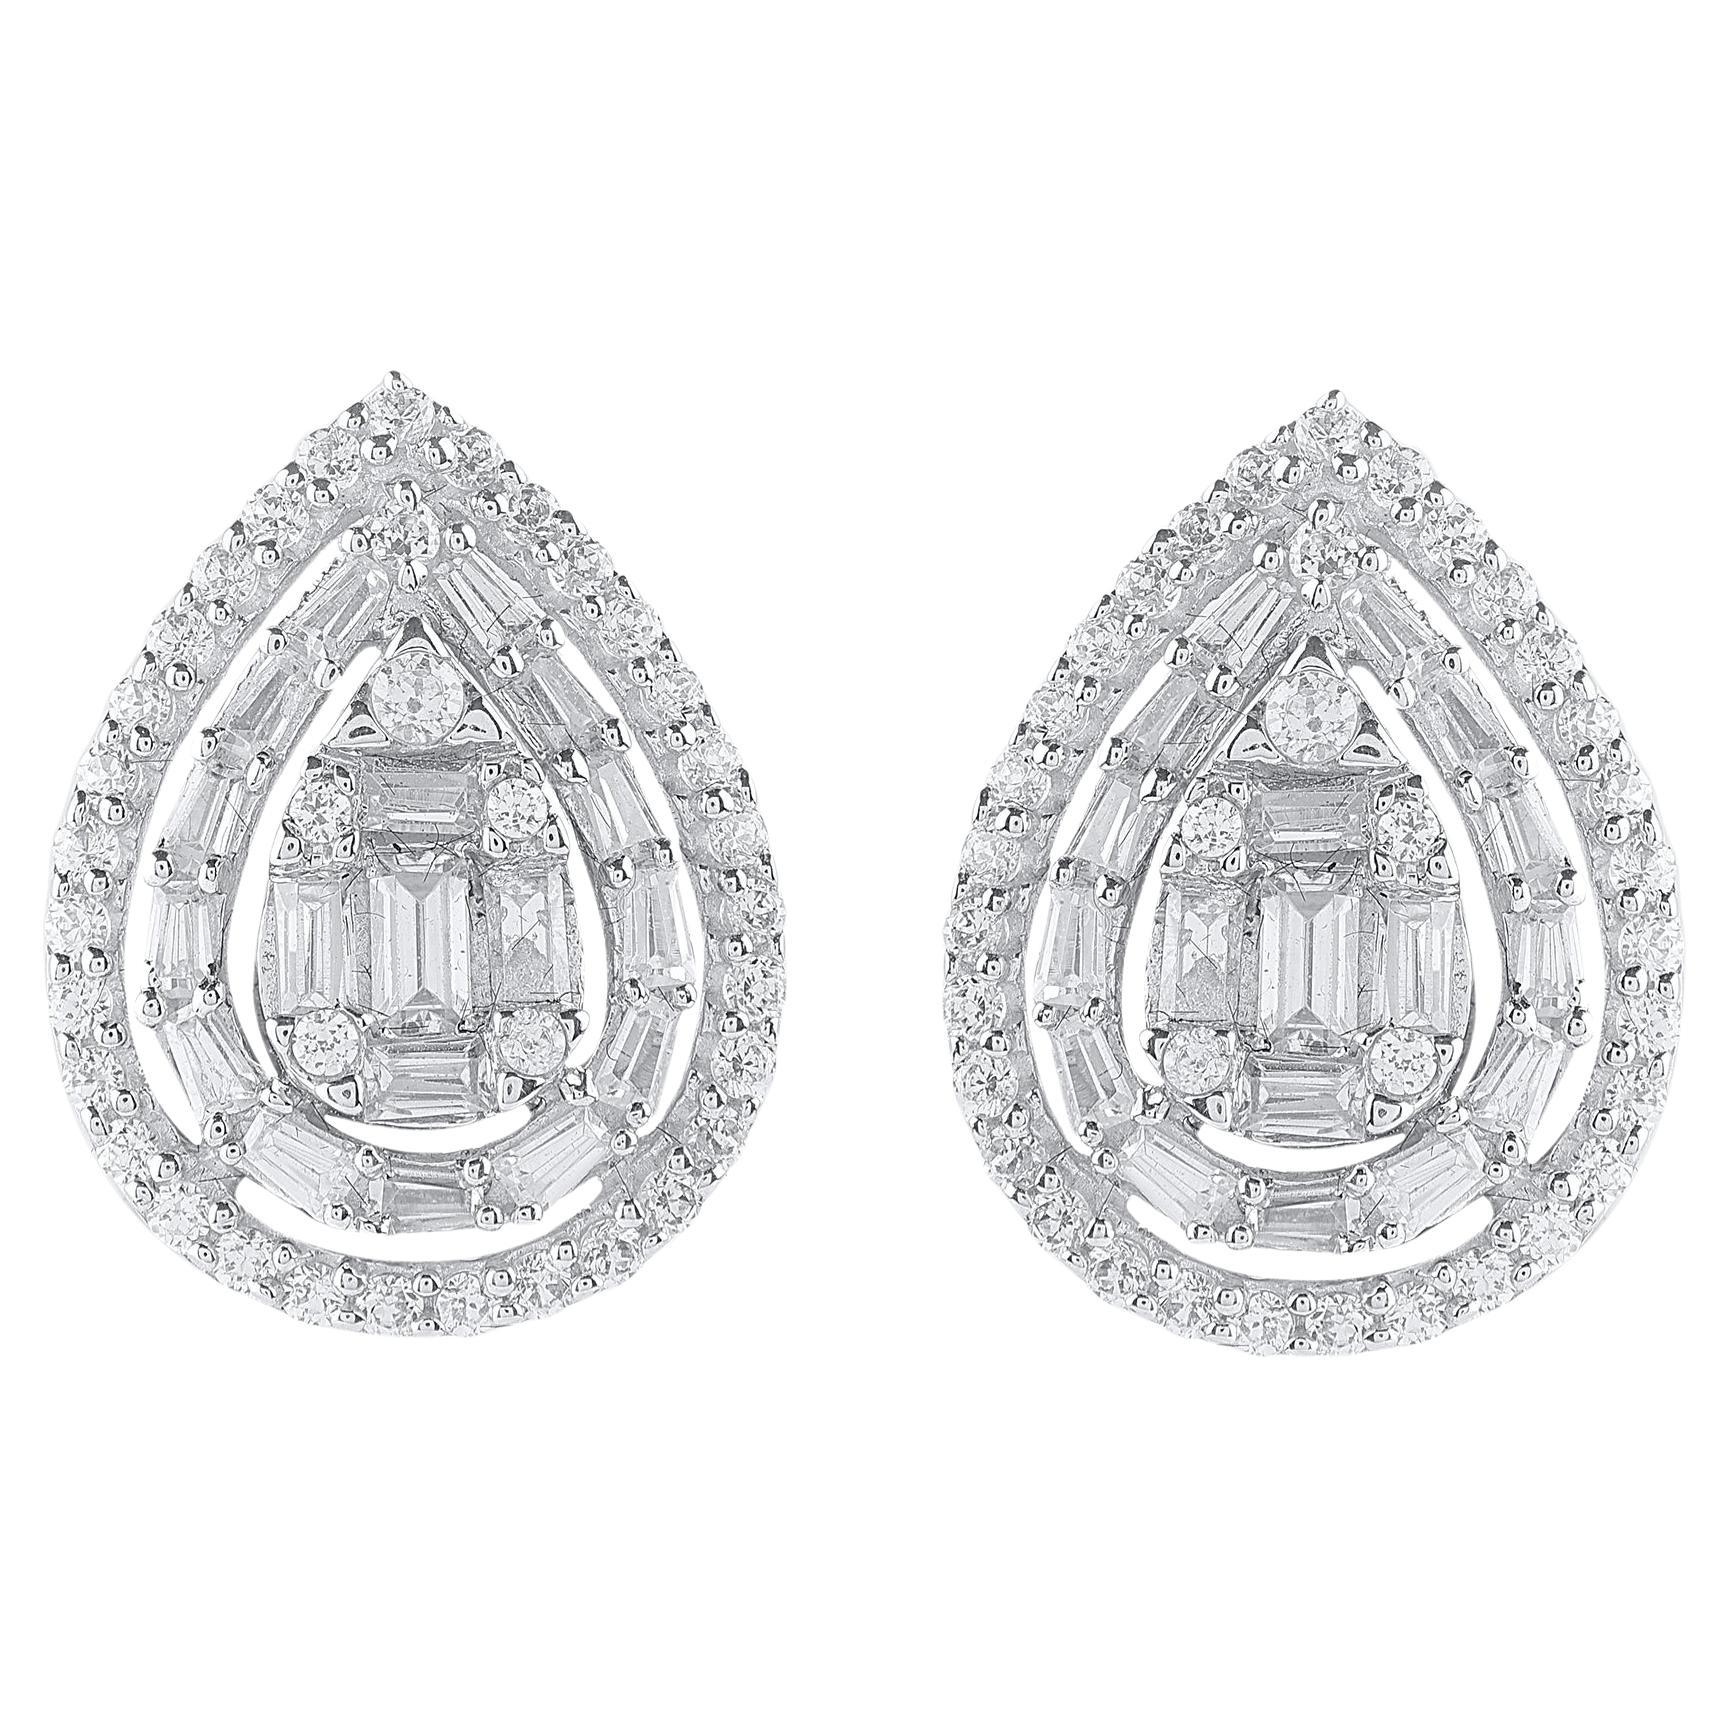 Timeless and elegant, these diamond drop stud earrings go from day to night with ease. This earring is beautifully designed and studded with 110 natural brilliant cut round diamond and baguette diamond set in prong & channel setting. The total